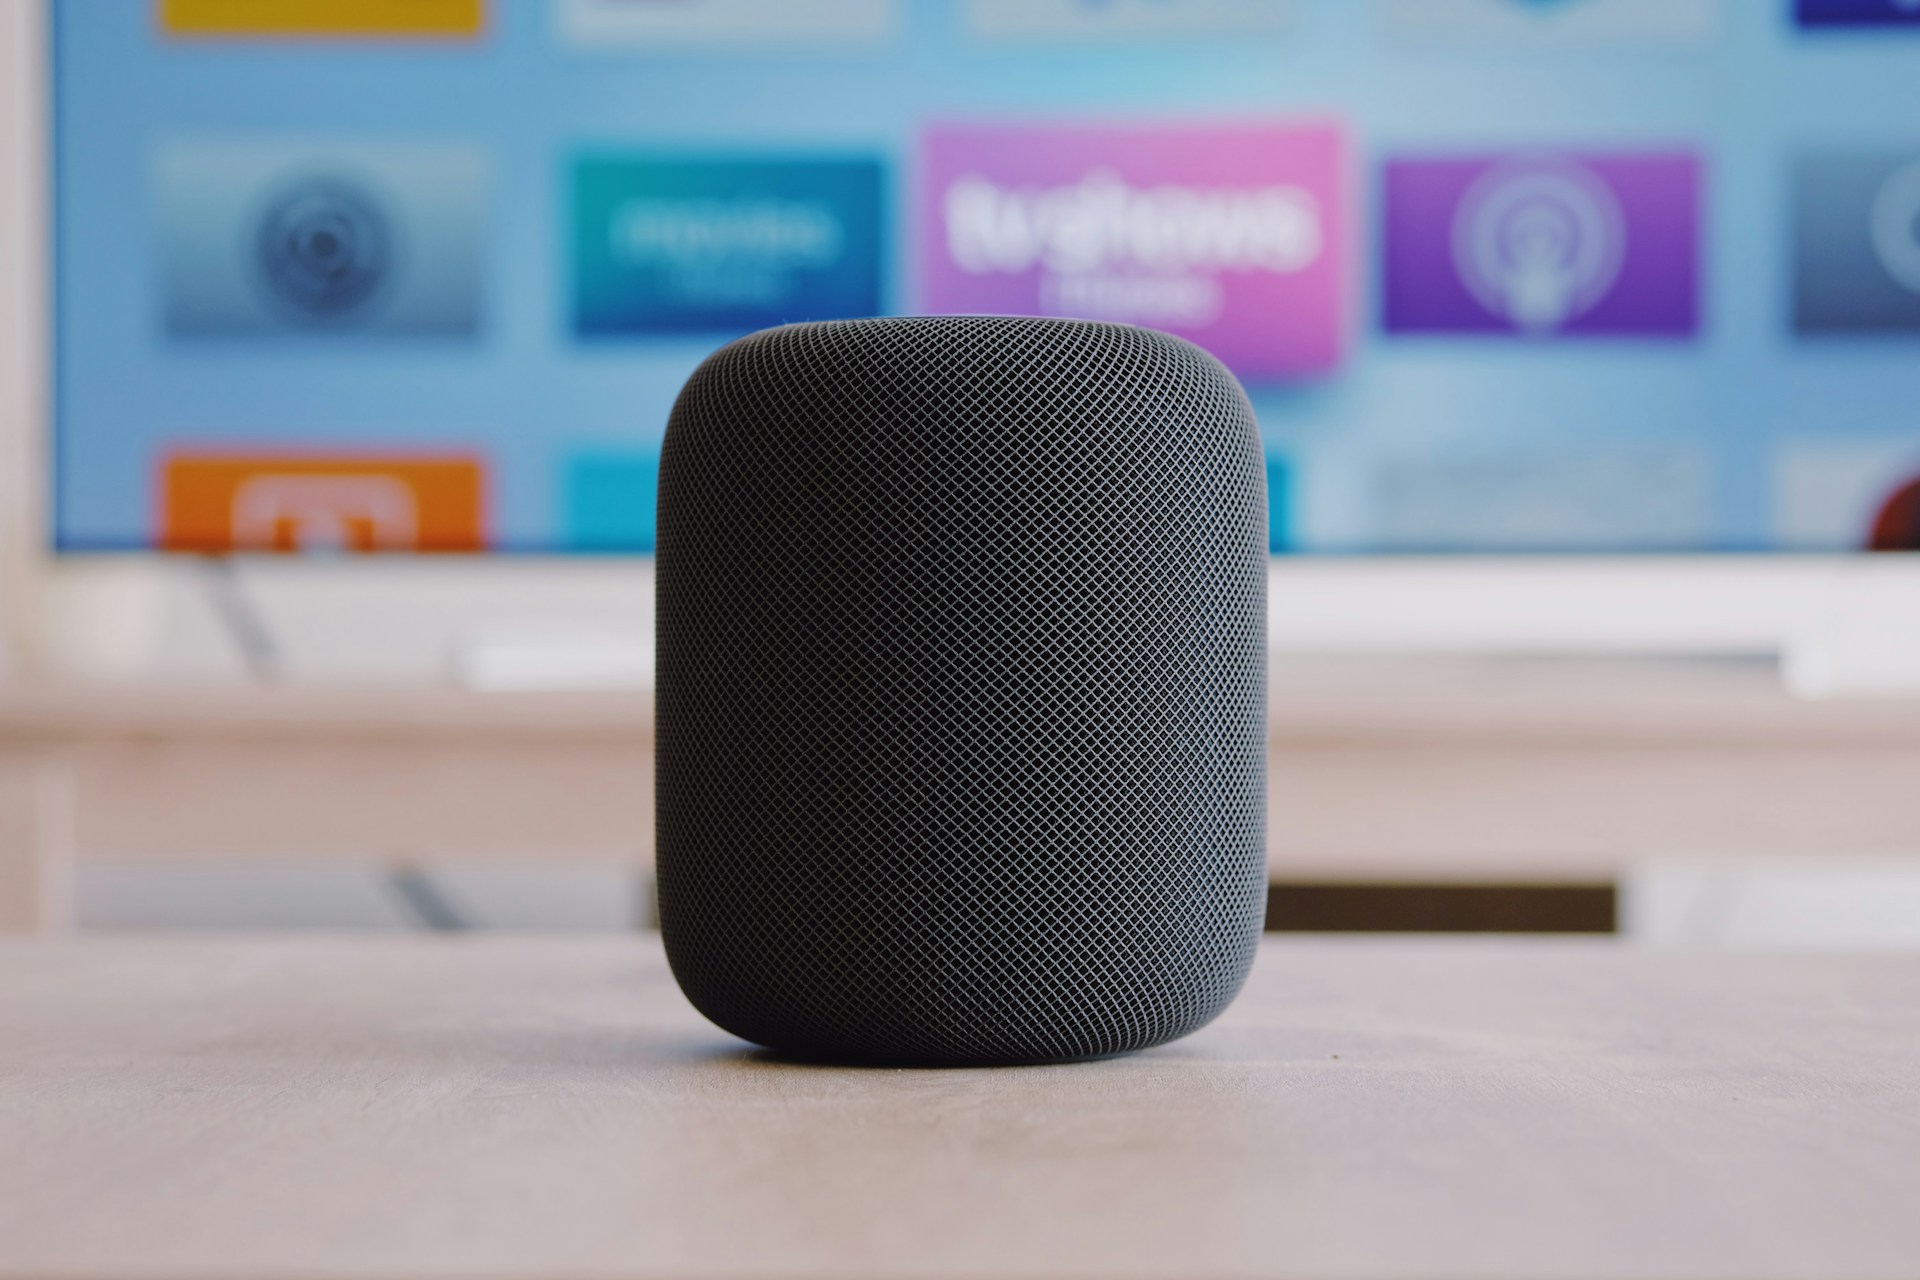 HomePod with a Display: All You Need to Know